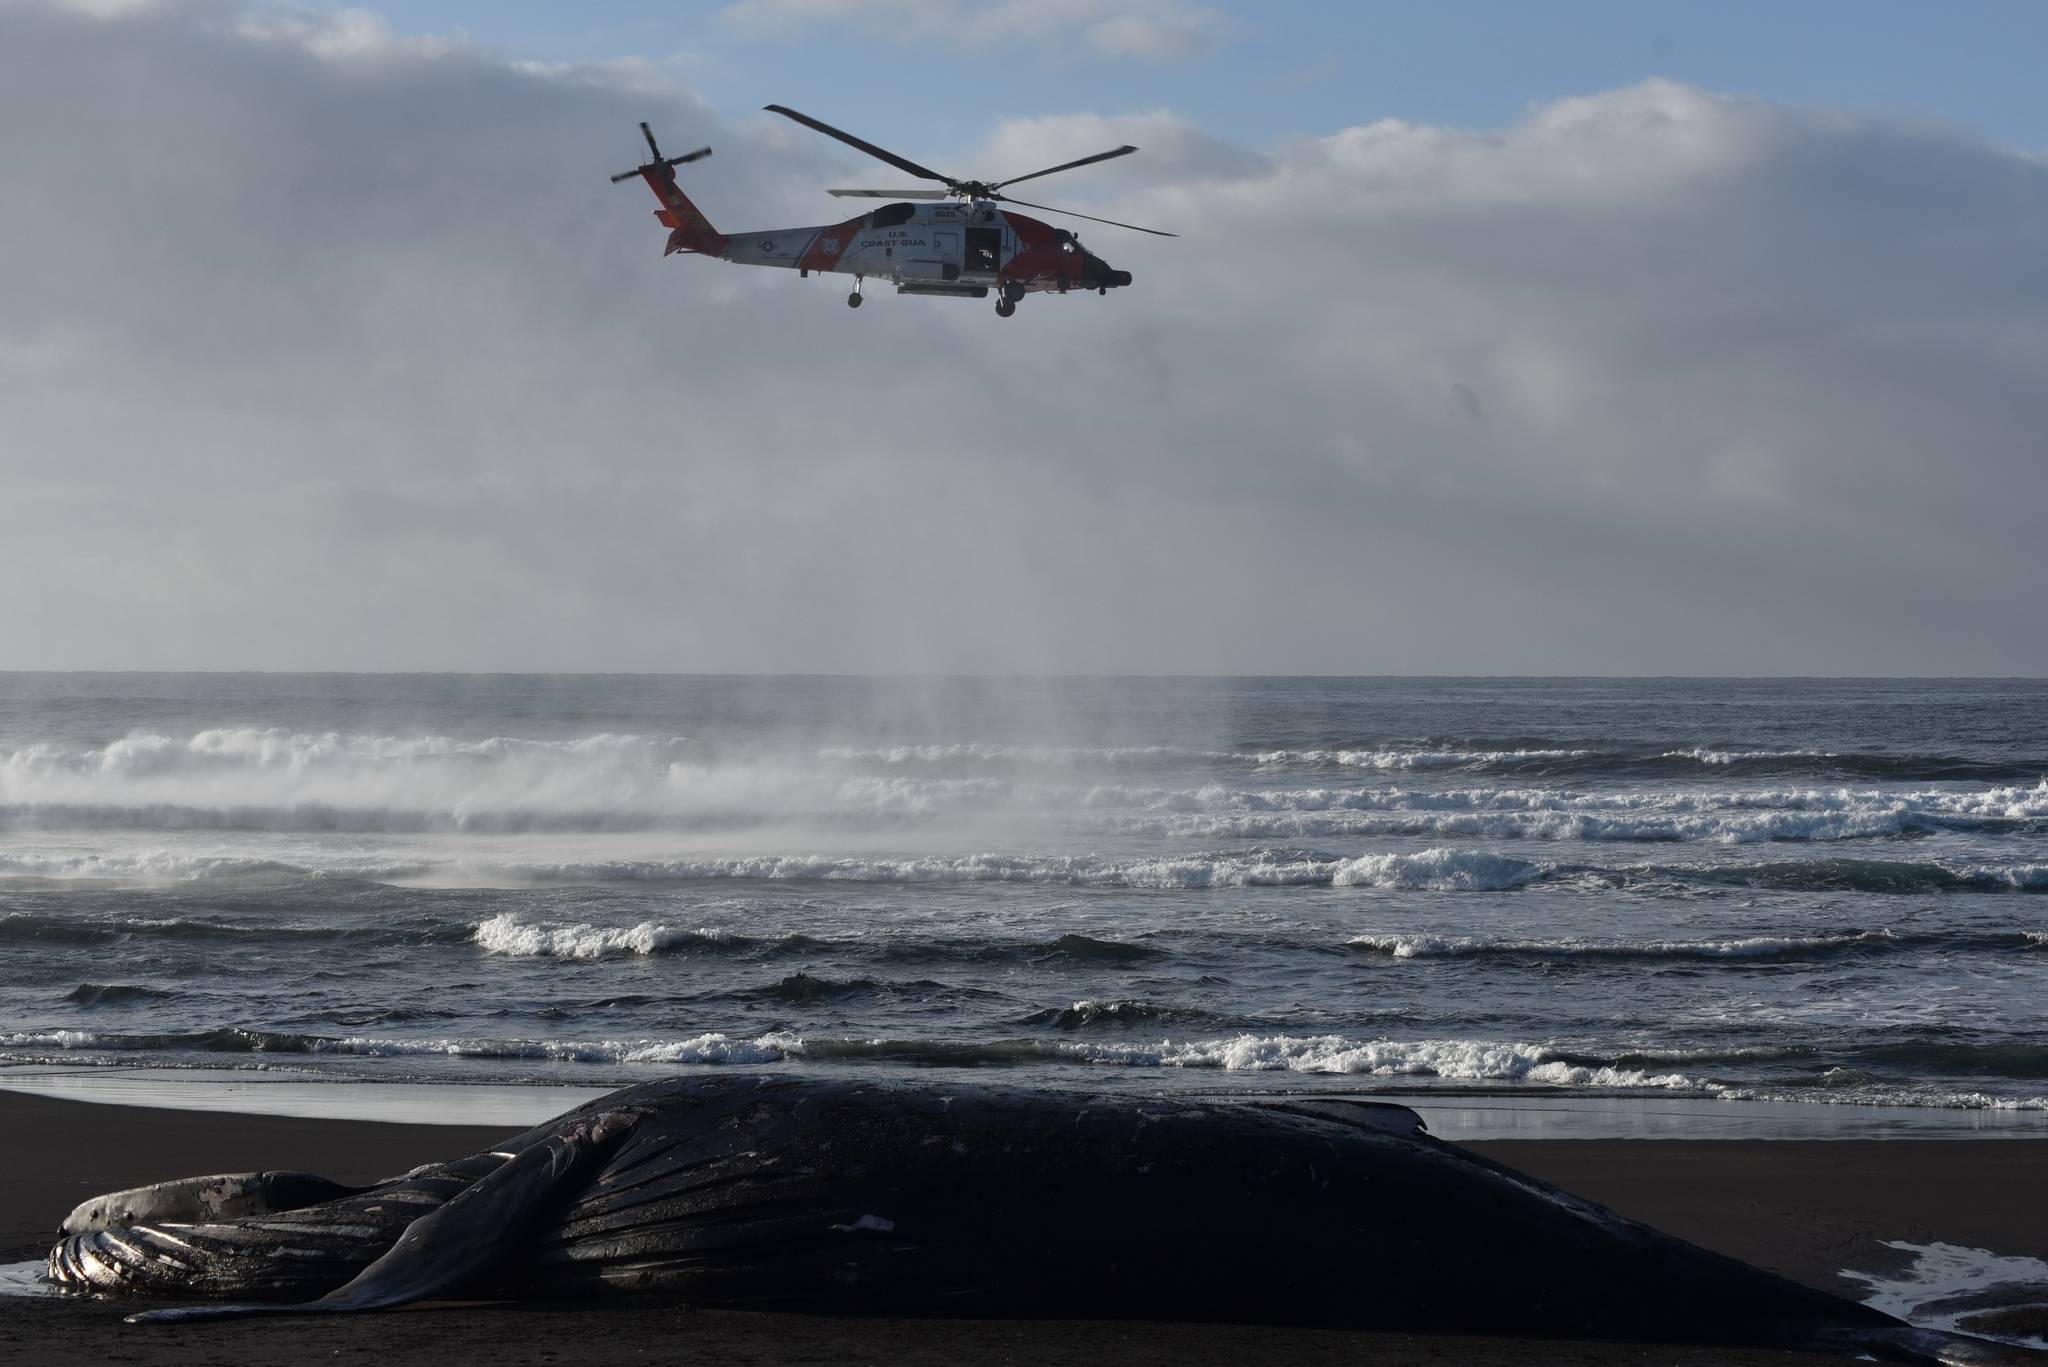 A U.S. Coast Guard helicopter helps ferry volunteers to the carcass of a beached humpback whale on Kuzof Island on Thursday, March 18, 2021. (Coutesy photo / Alaska Marine Mammal Stranding Network)